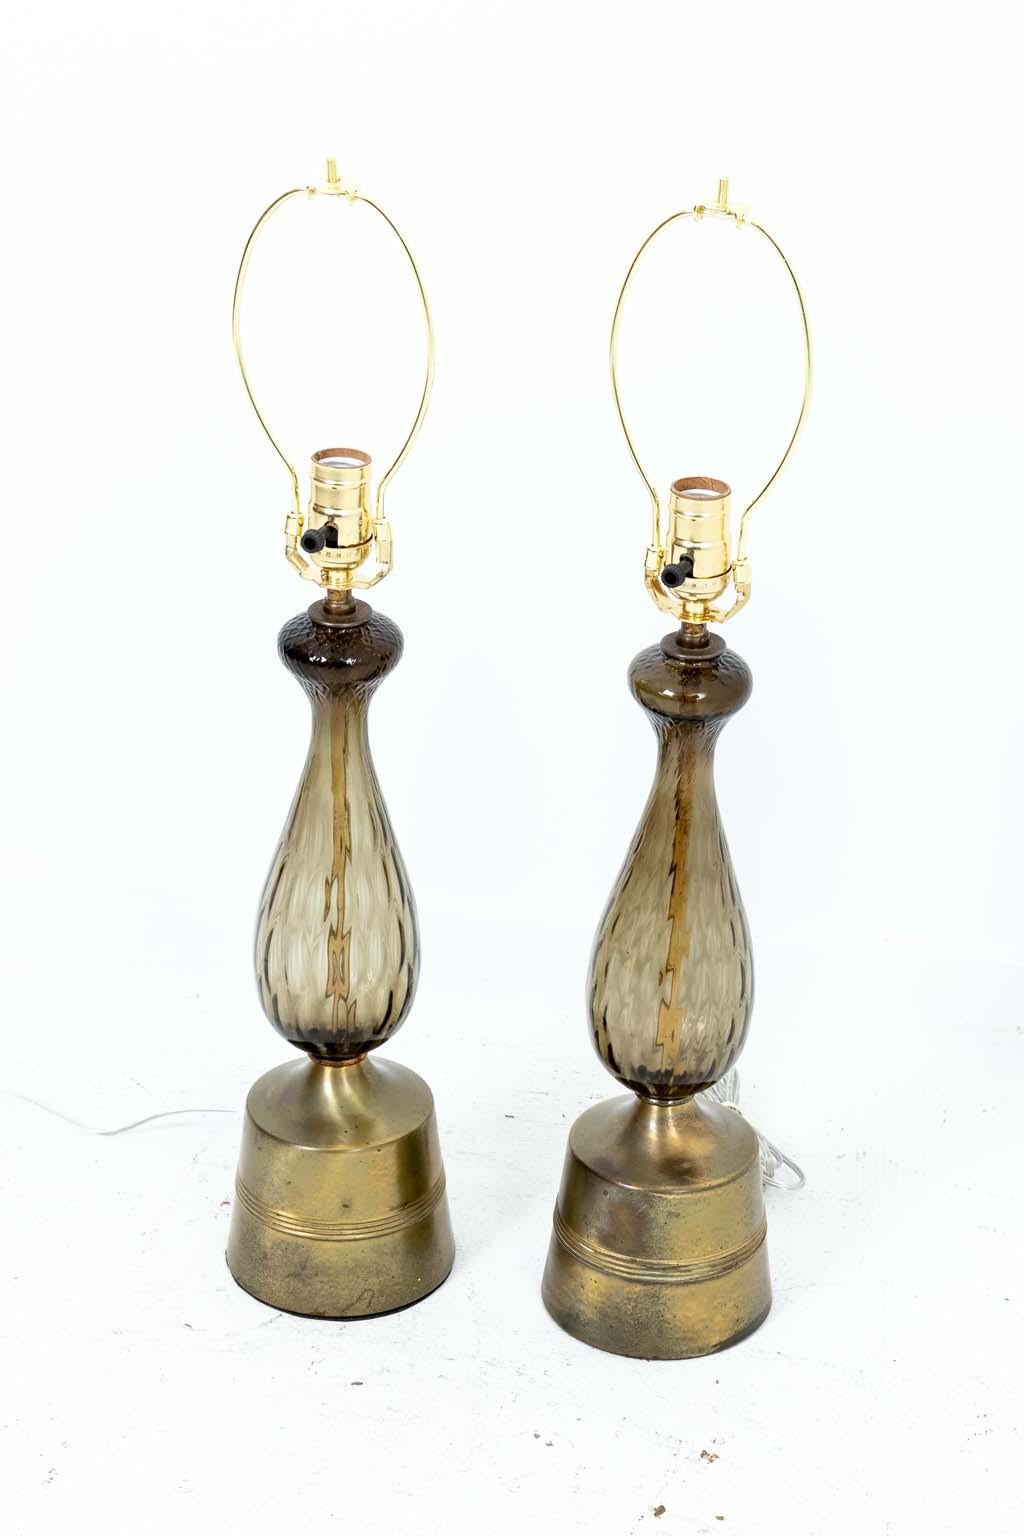 Pair Of Italian Glass Lamps on Metal Bases, rewired.
